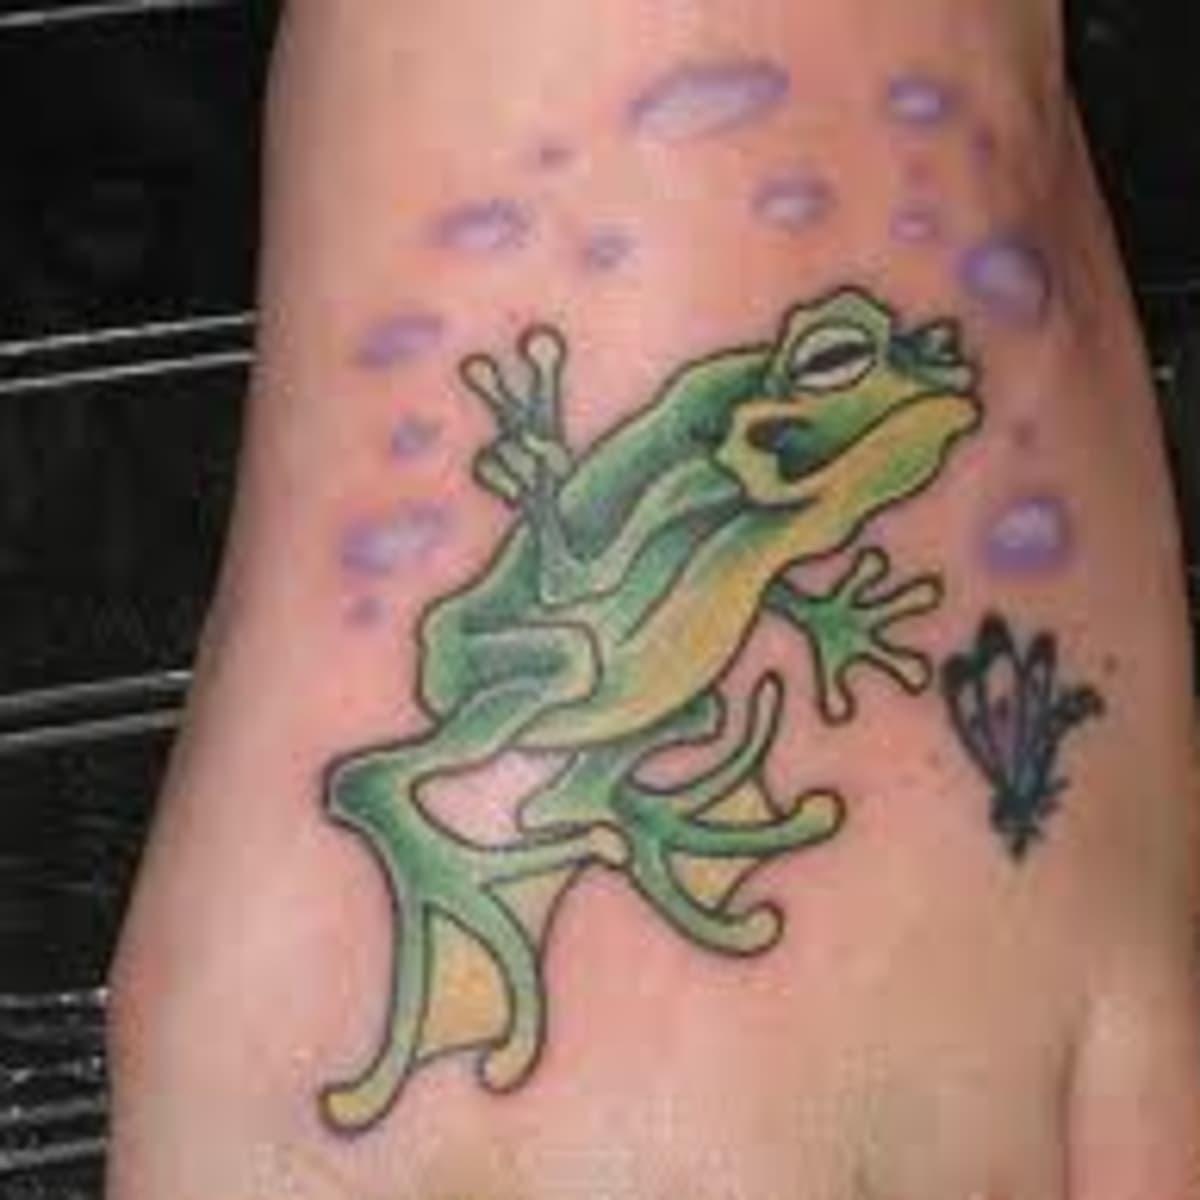 Dexterity  Super cool frog tattoo by our artist dbtattooer Drop him a  message if youd like to get booked in for something similar  dexteritywrexham wrexham wrexhamtattoo tattoo tattoos tattooartist  tattooideas tattooed 